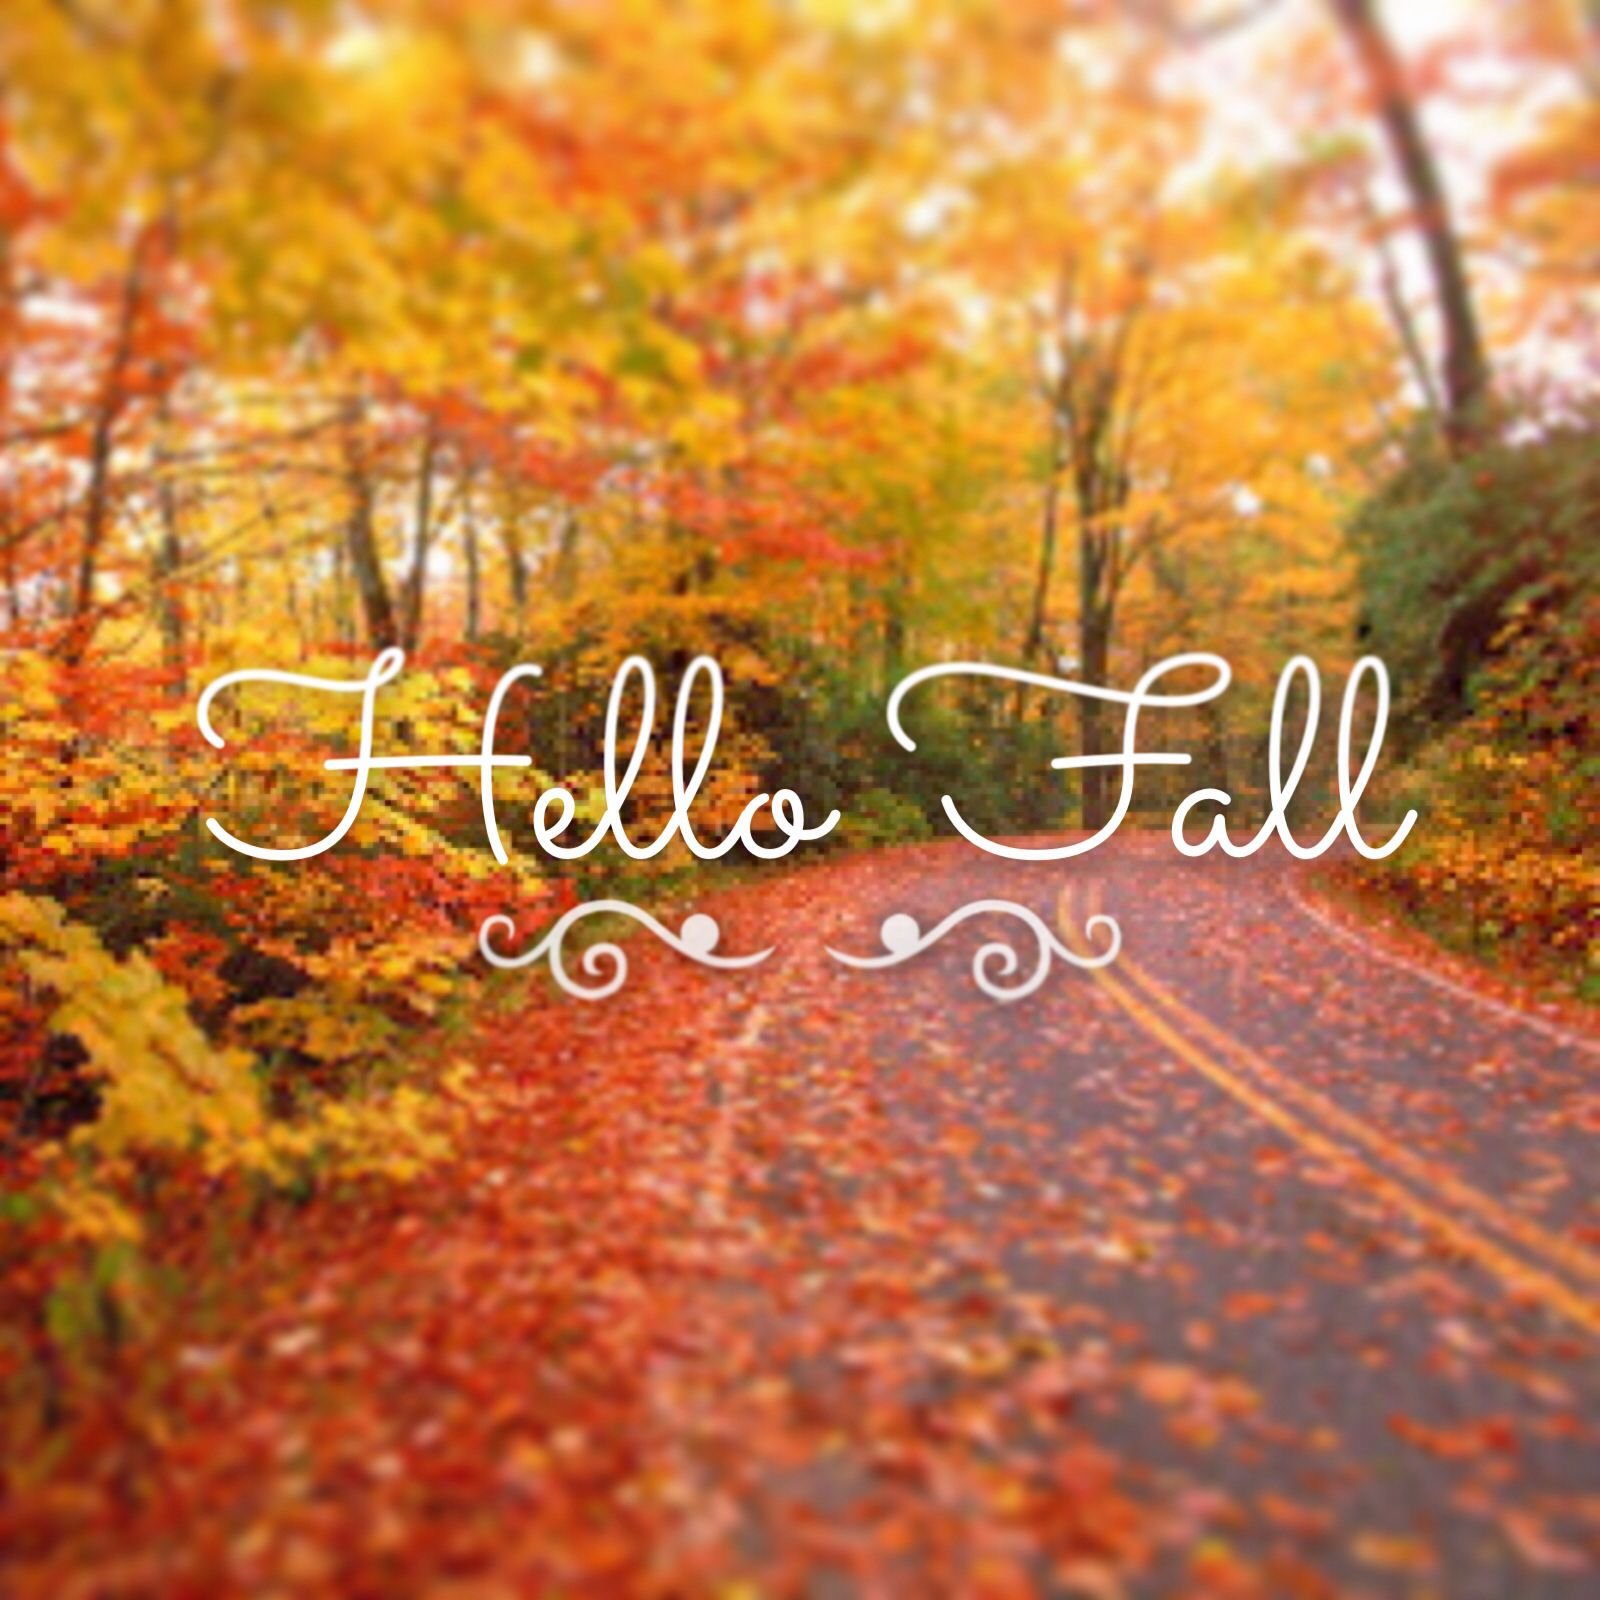 Cool facts about “Fall” in British!